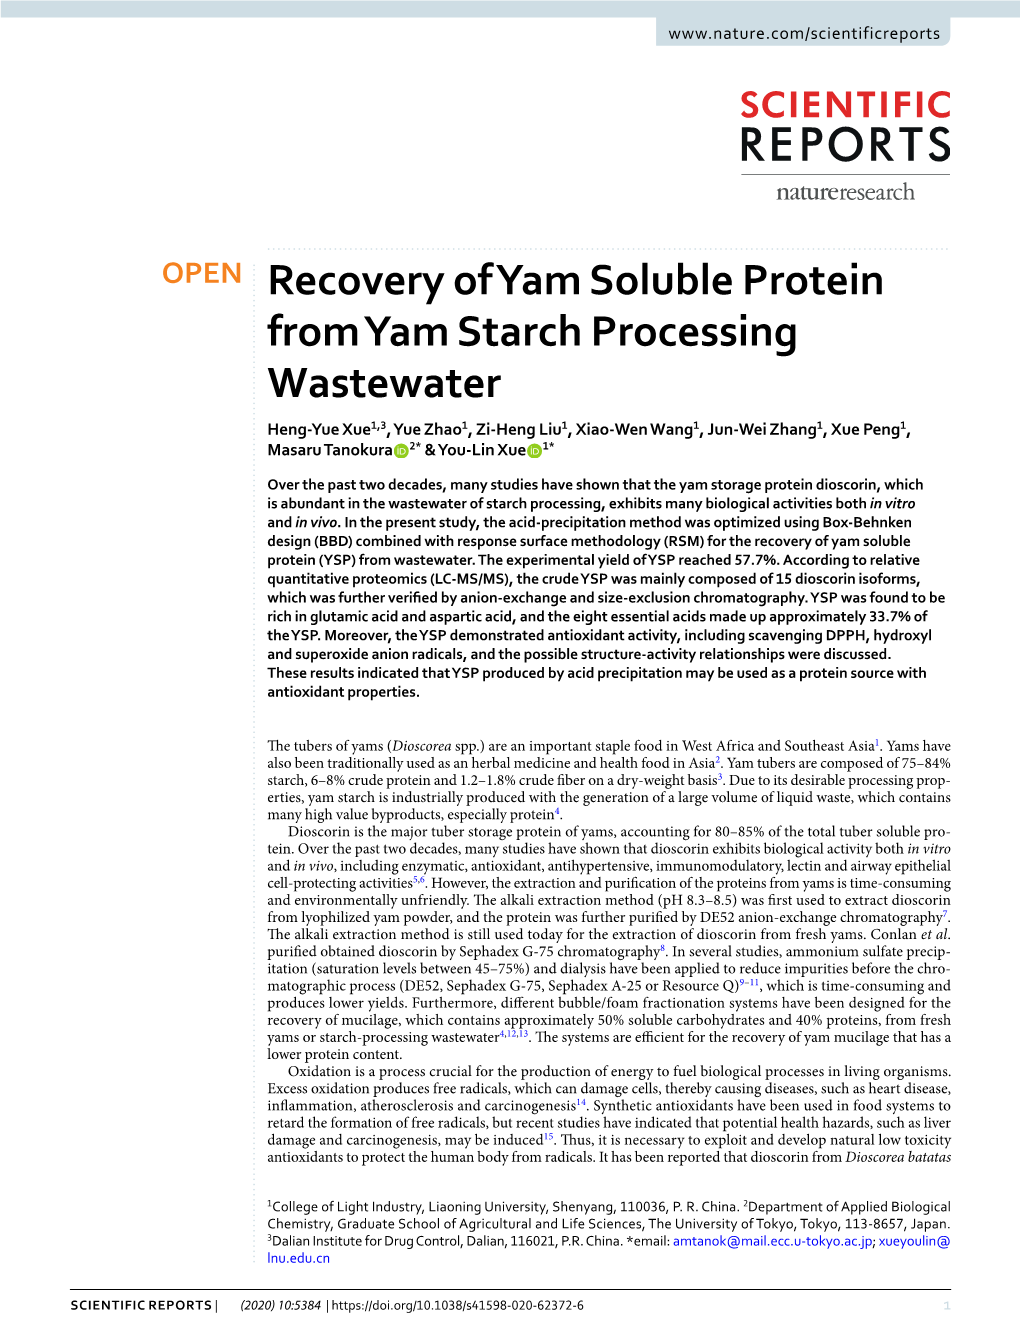 Recovery of Yam Soluble Protein from Yam Starch Processing Wastewater